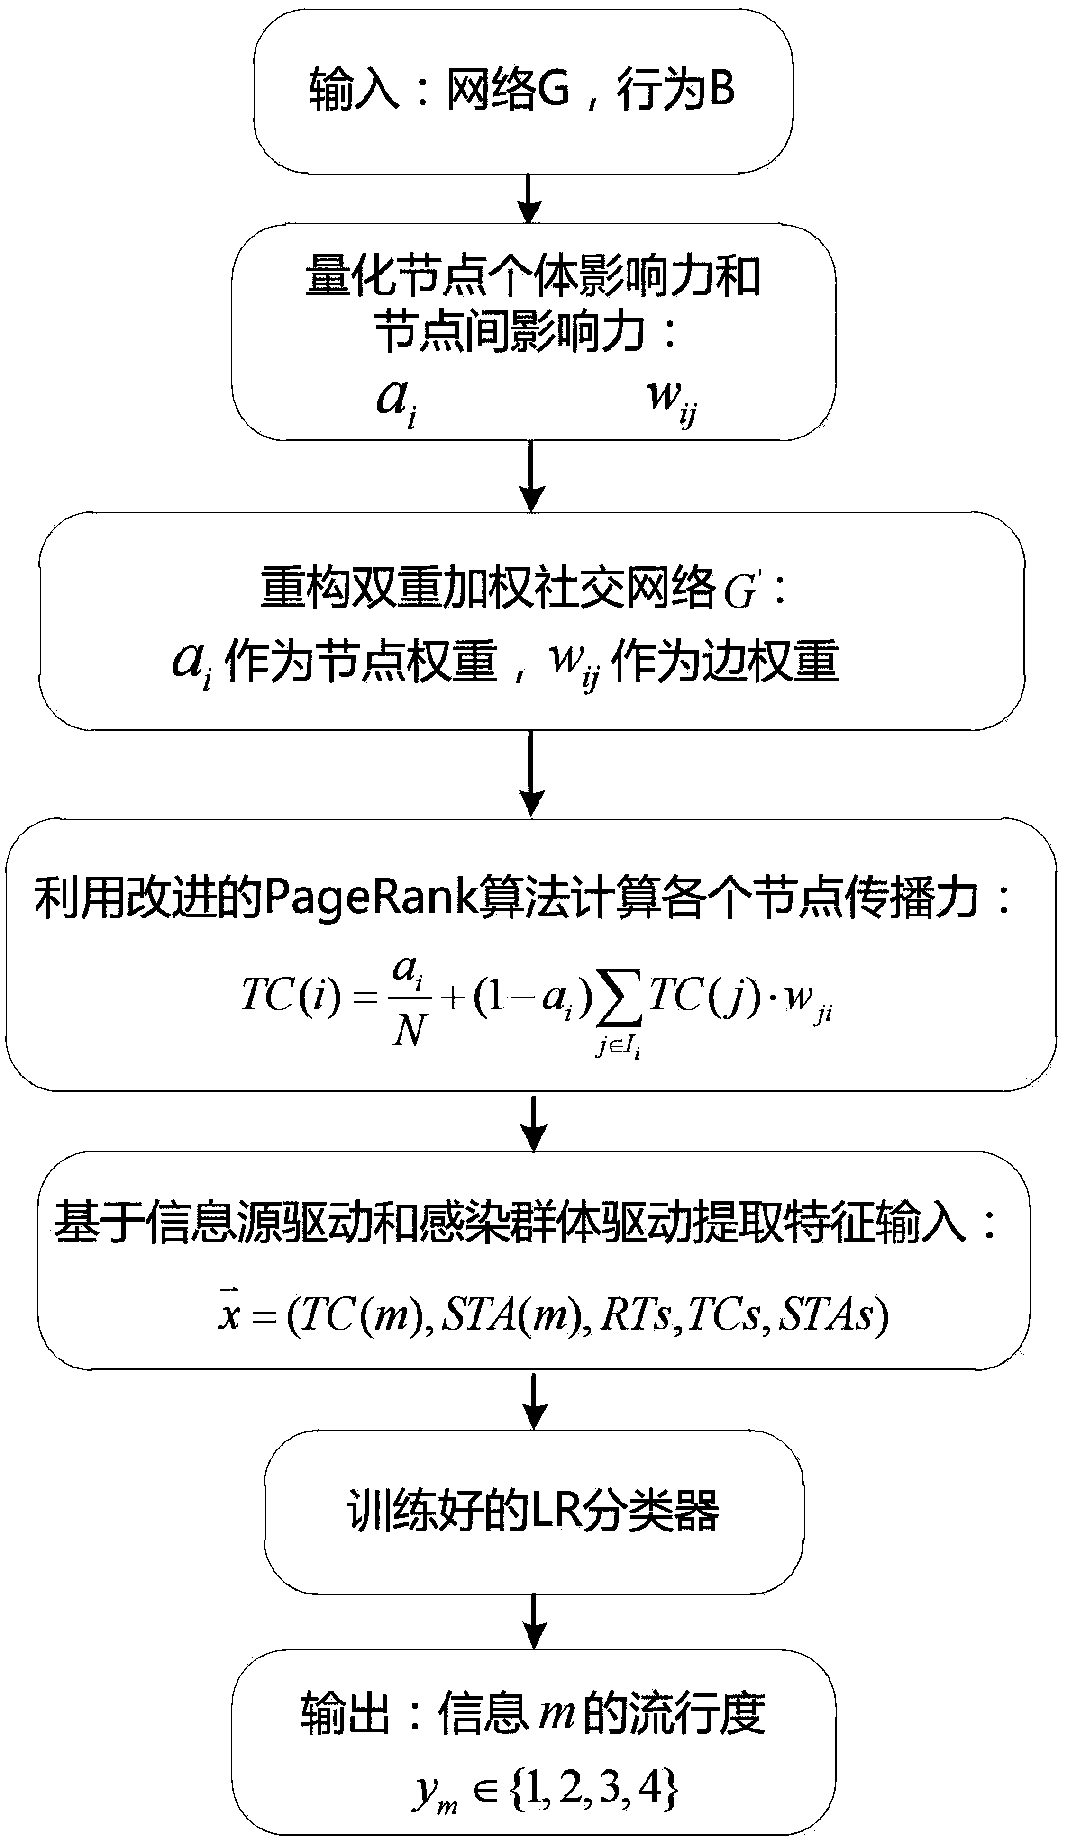 Method and system for predicting information popularity of social network